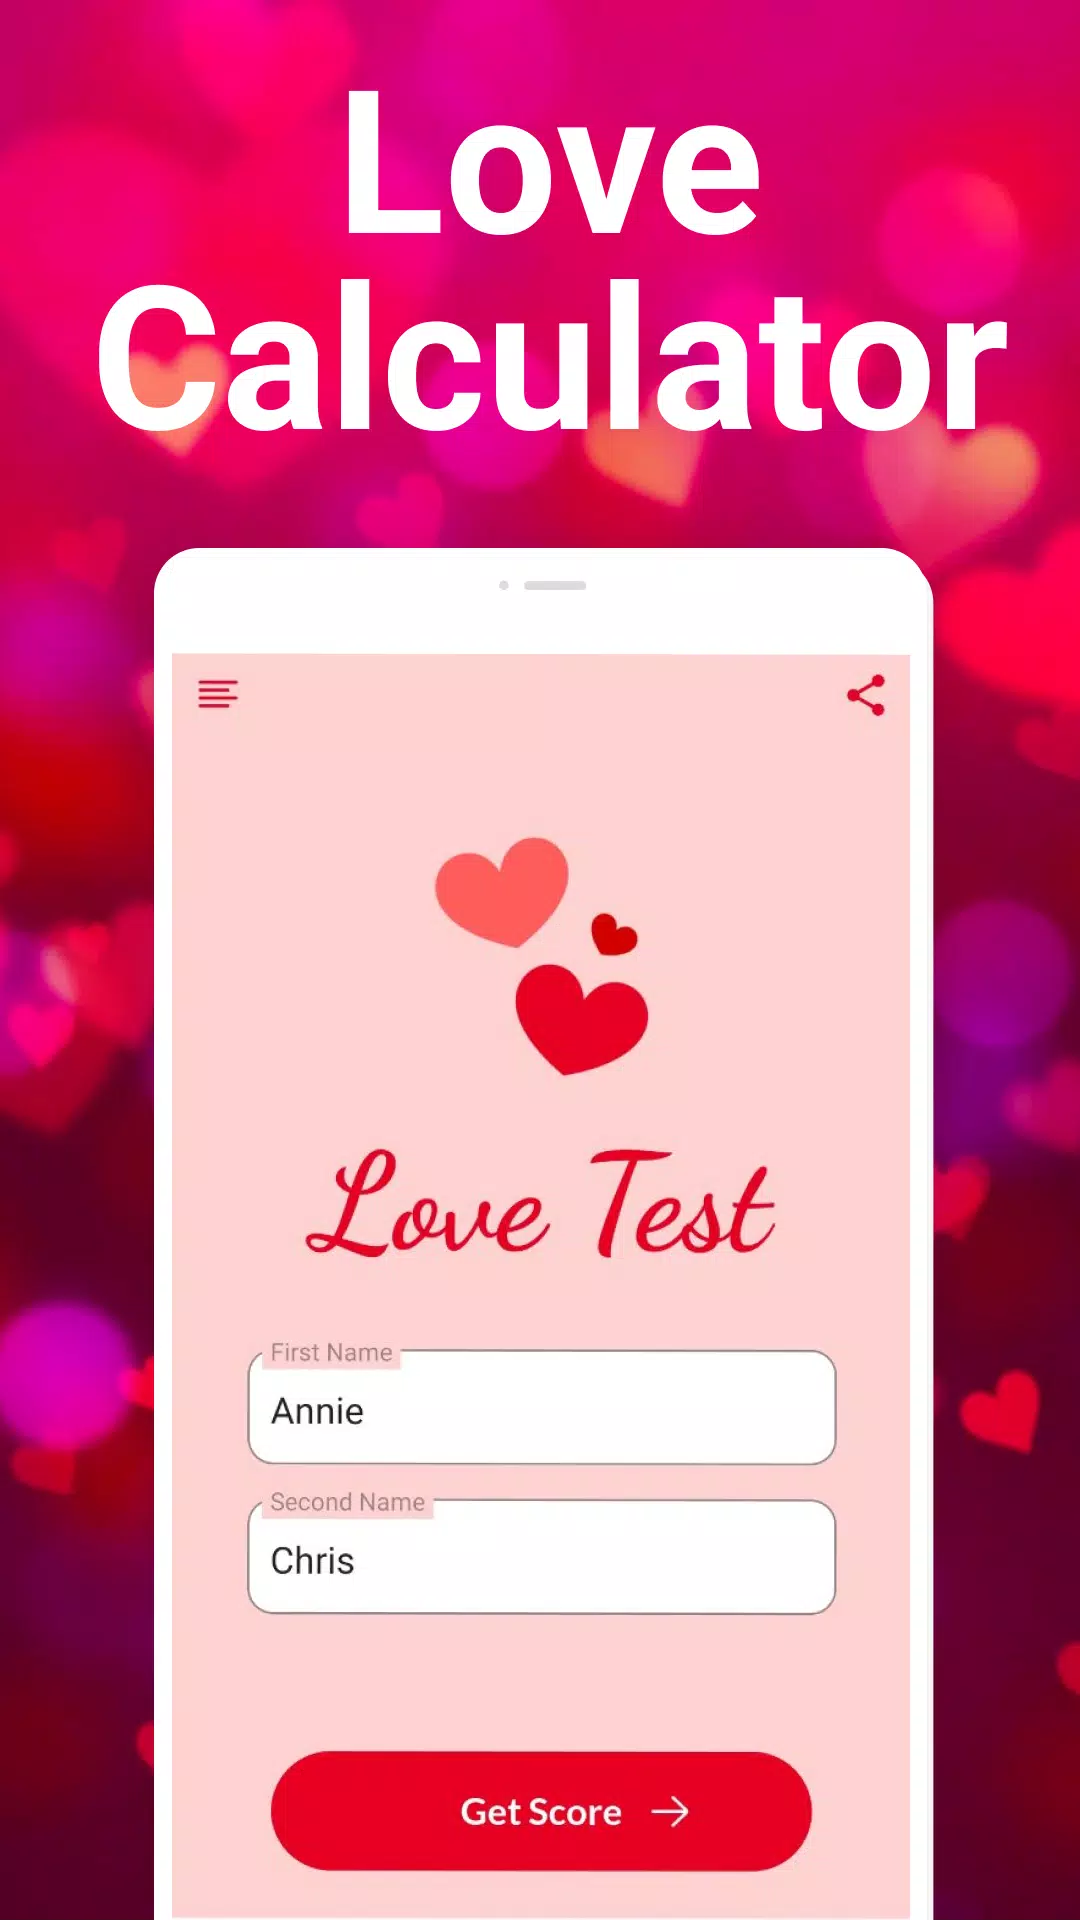 Real Love Test Calculator - Free Download